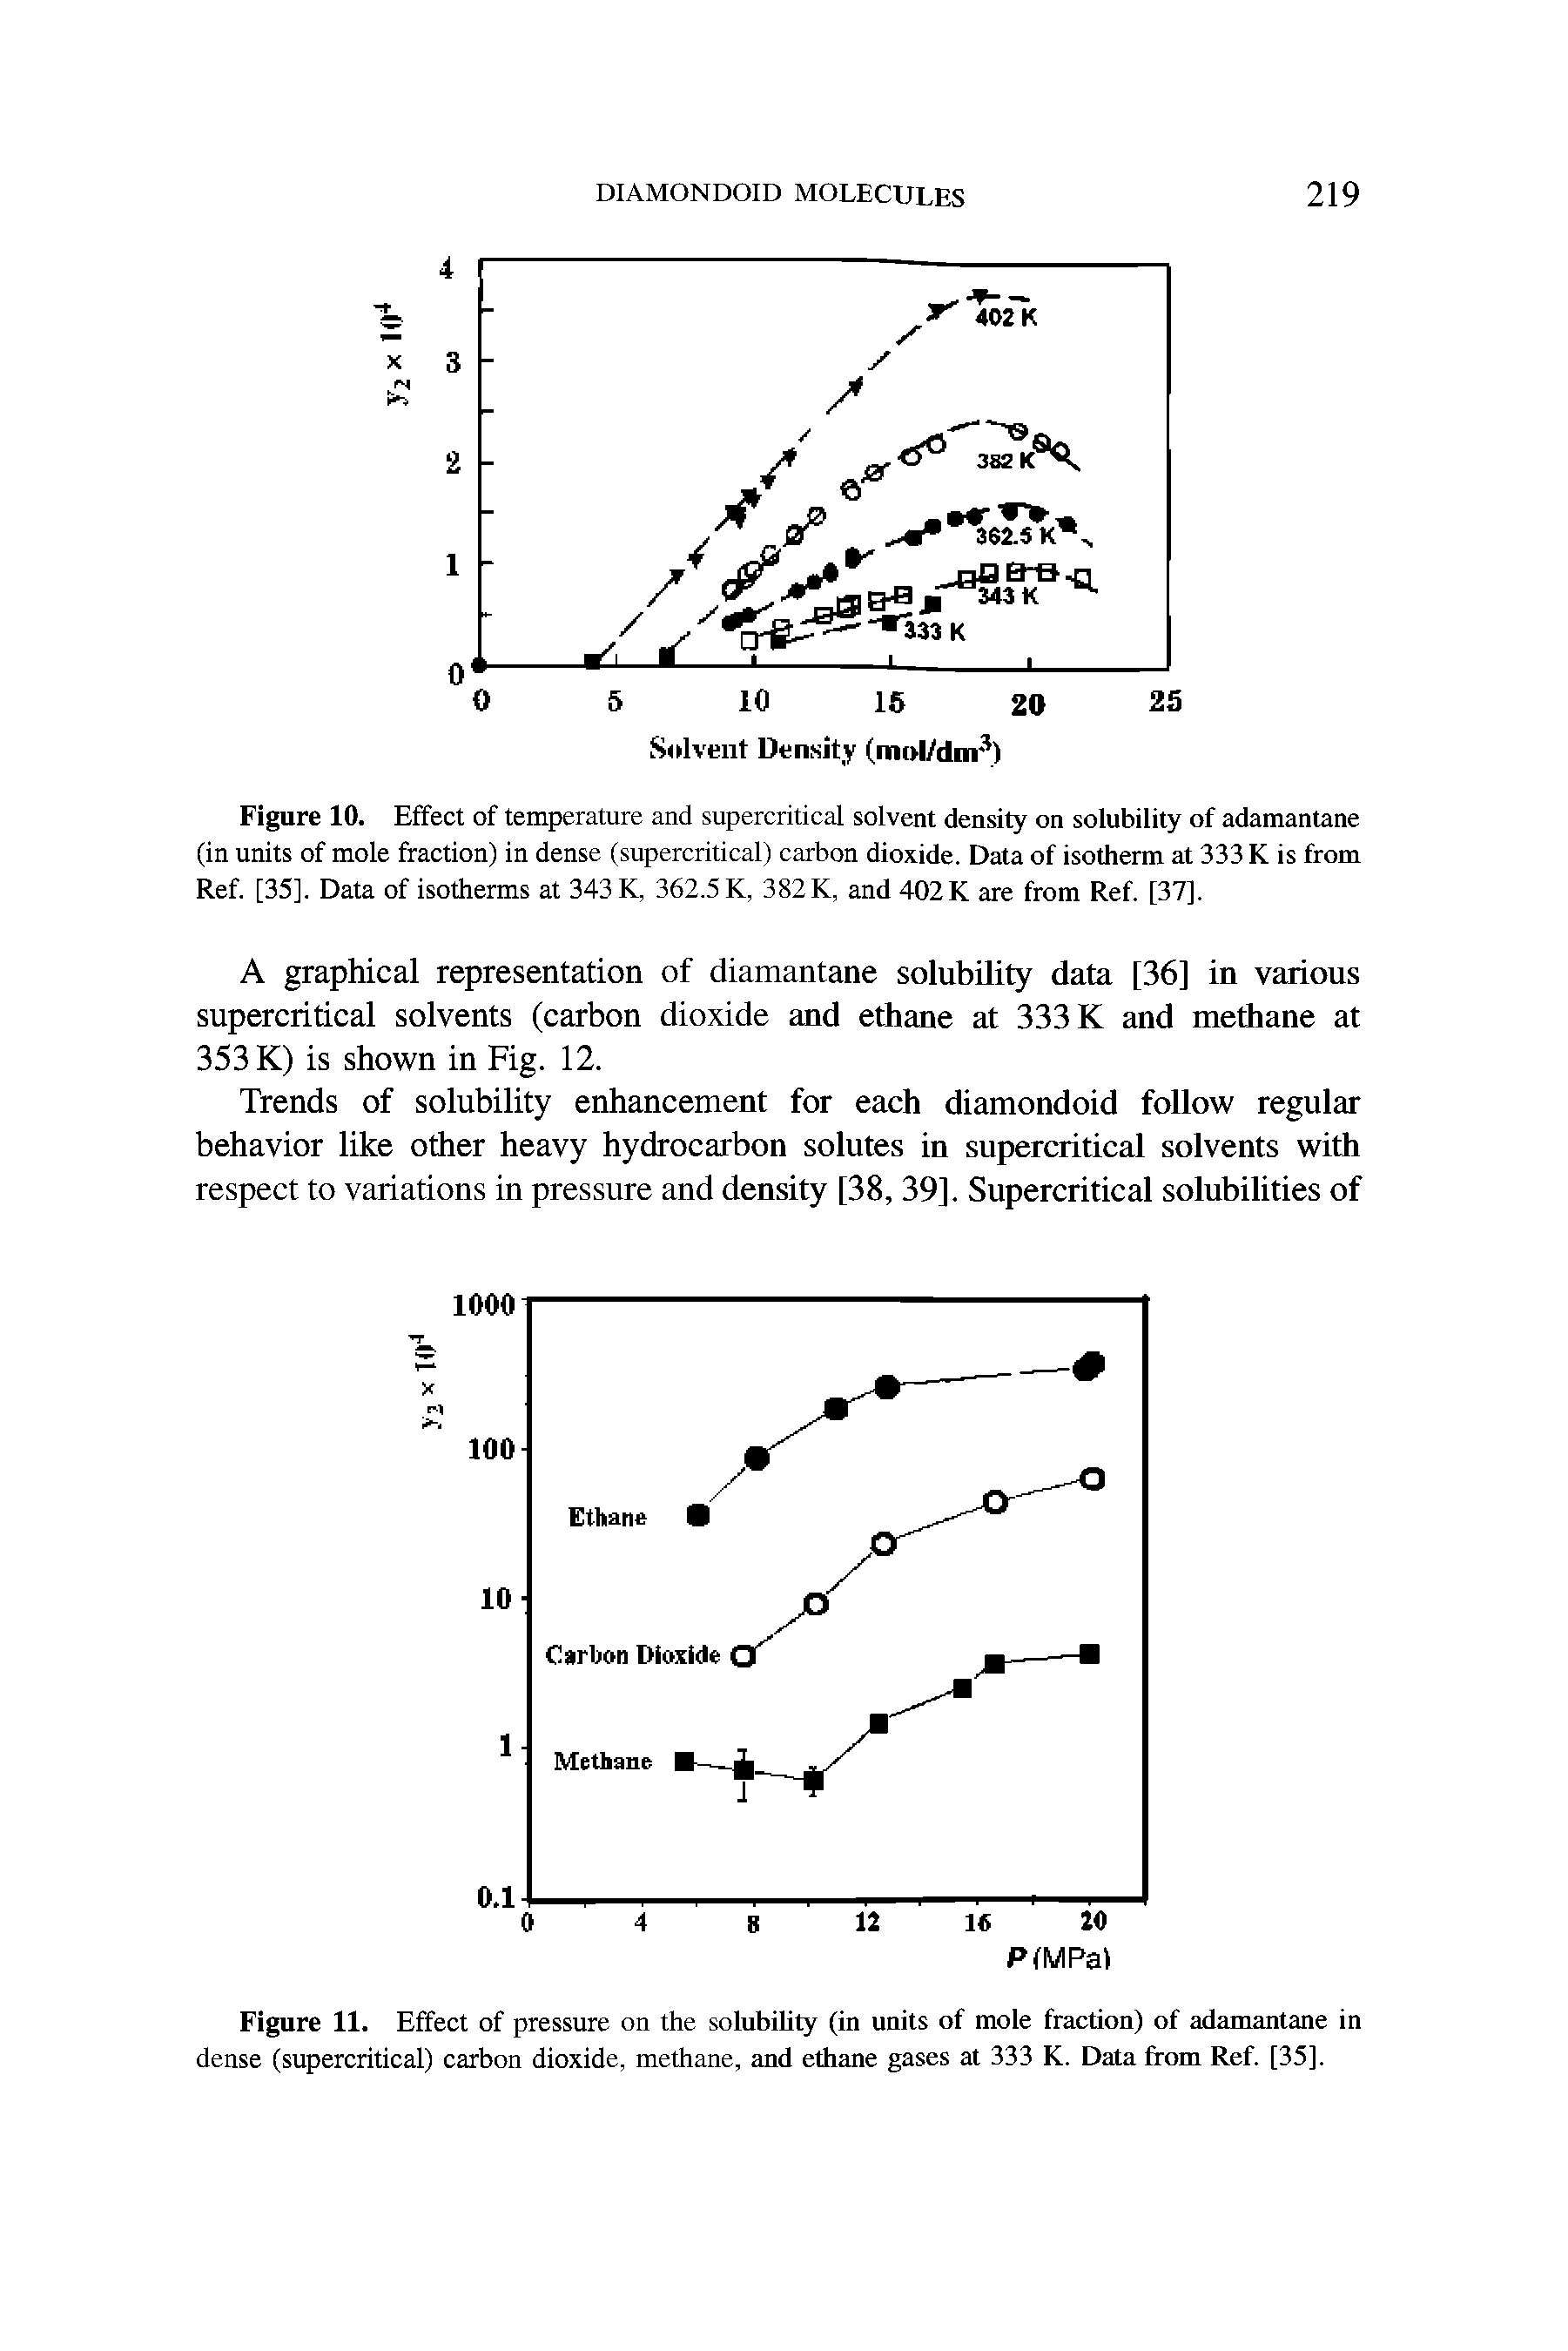 Figure 11. Effect of pressure on the solubility (in units of mole fraction) of adamantane in dense (supercritical) carbon dioxide, methane, and ethane gases at 333 K. Data from Ref. [35].